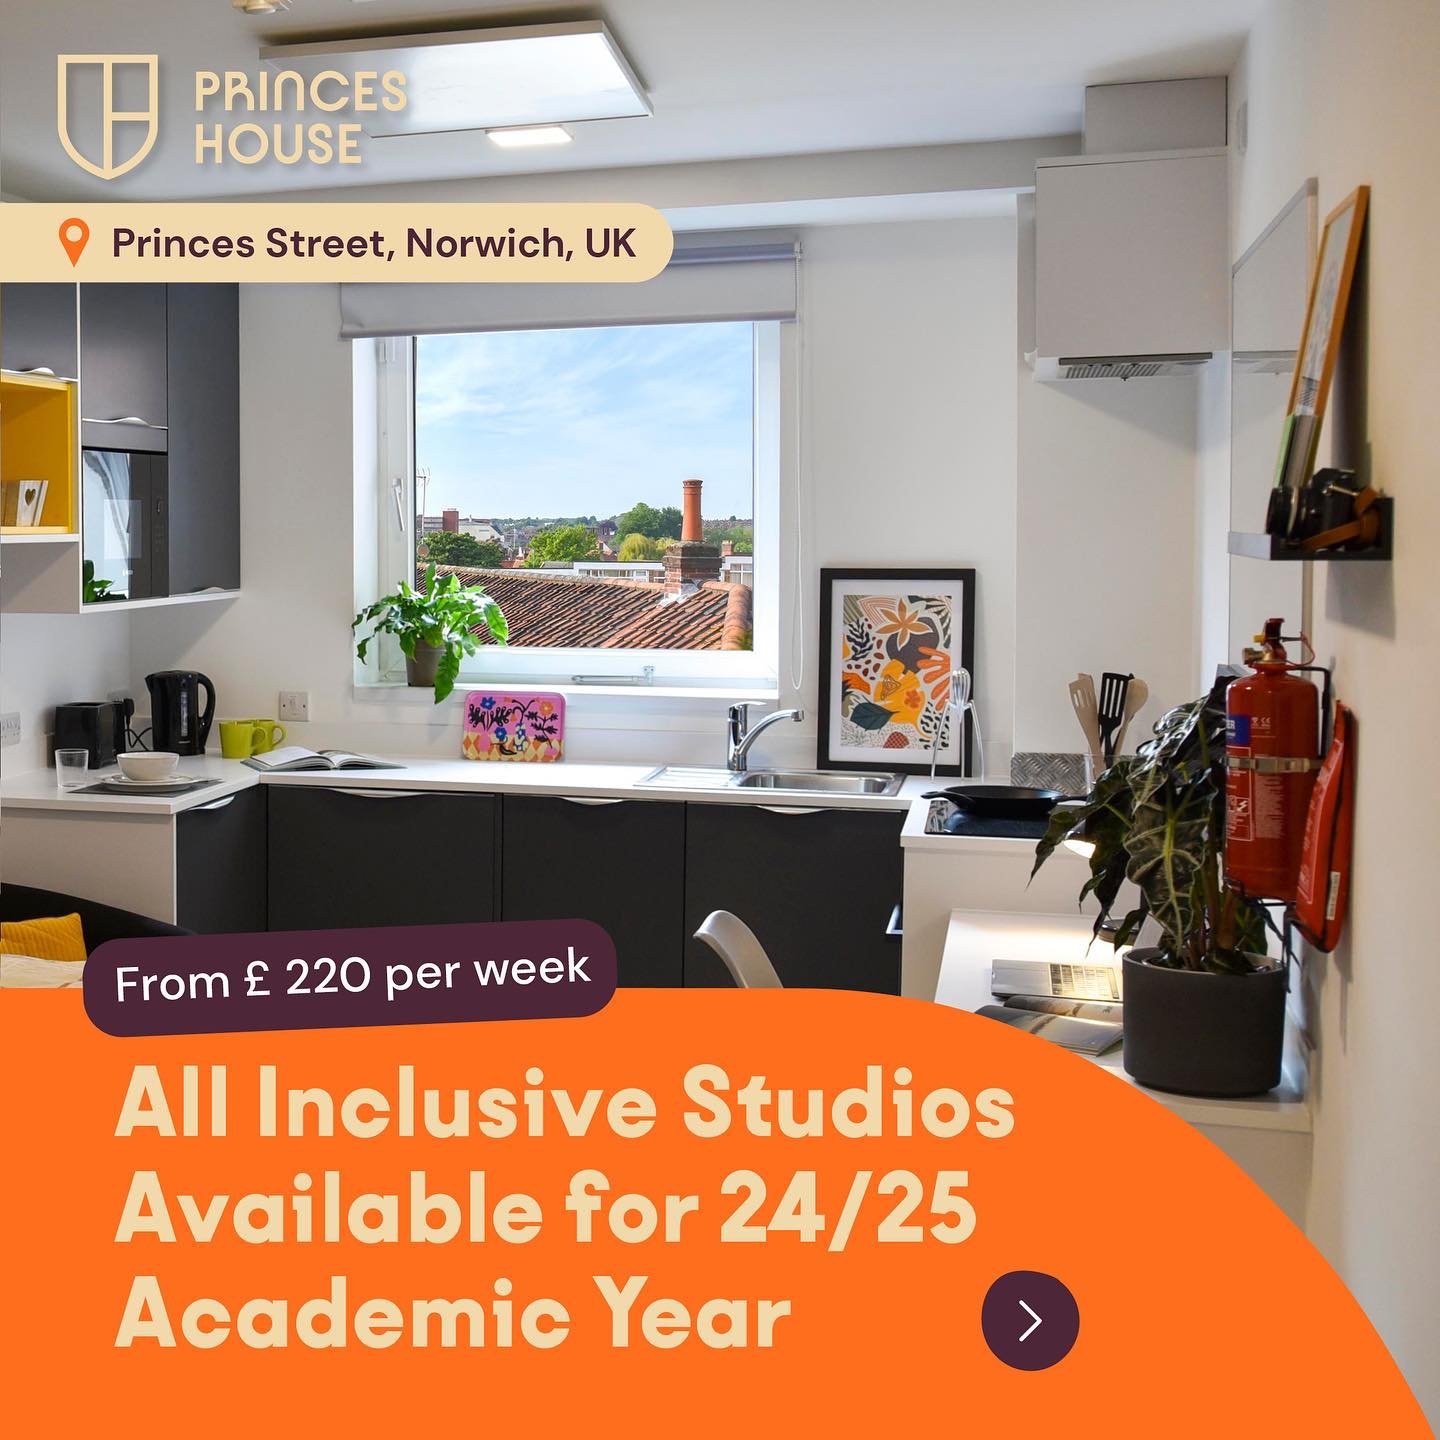 👉🏻 If you&rsquo;re looking for a place to live and study for your next academic year in Norwich, have a look at our studios. They are all-inclusive and built to an exceptional standard.

📍Princes House is situated in the Creative Heart of Norwich,